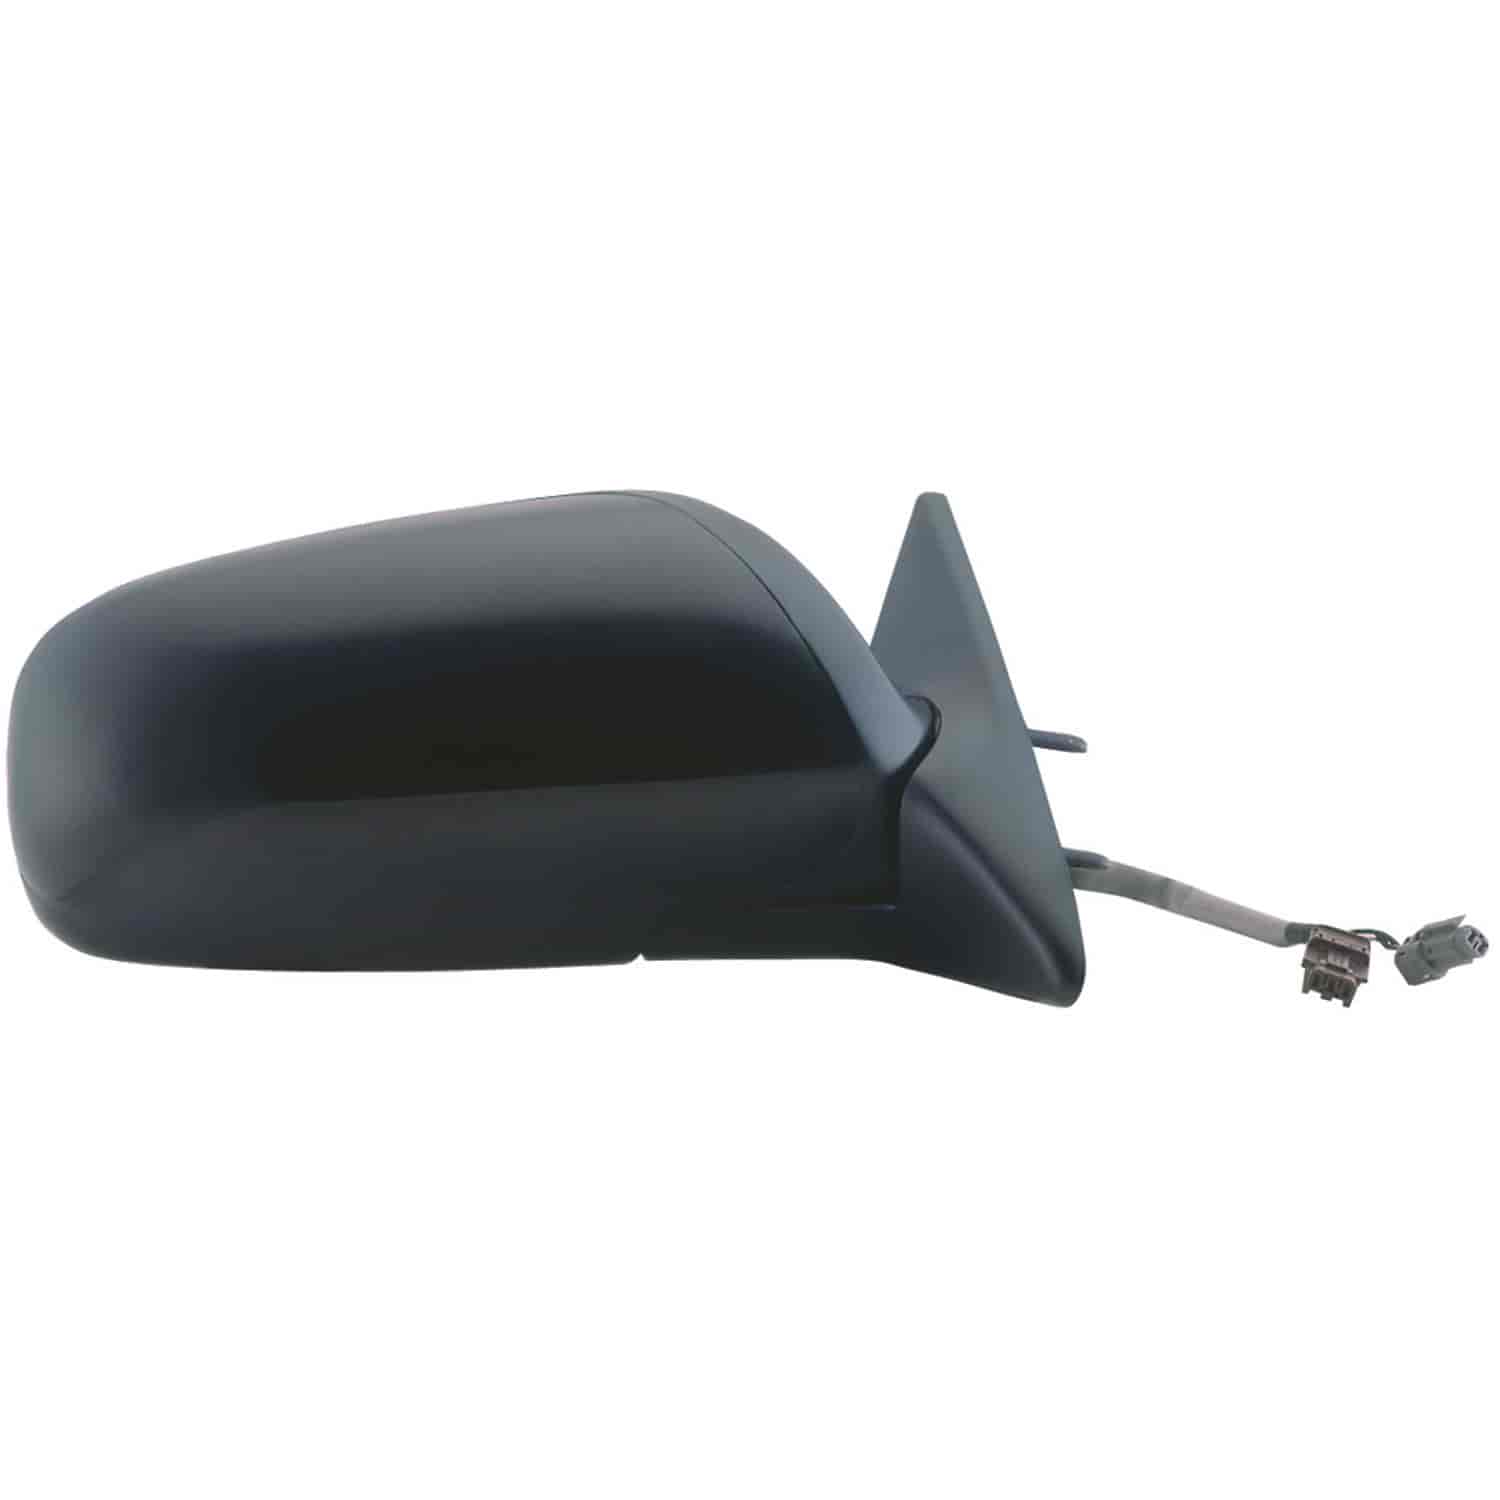 OEM Style Replacement mirror for 96-99 Nissan Maxima Infiniti I30 passenger side mirror tested to fi